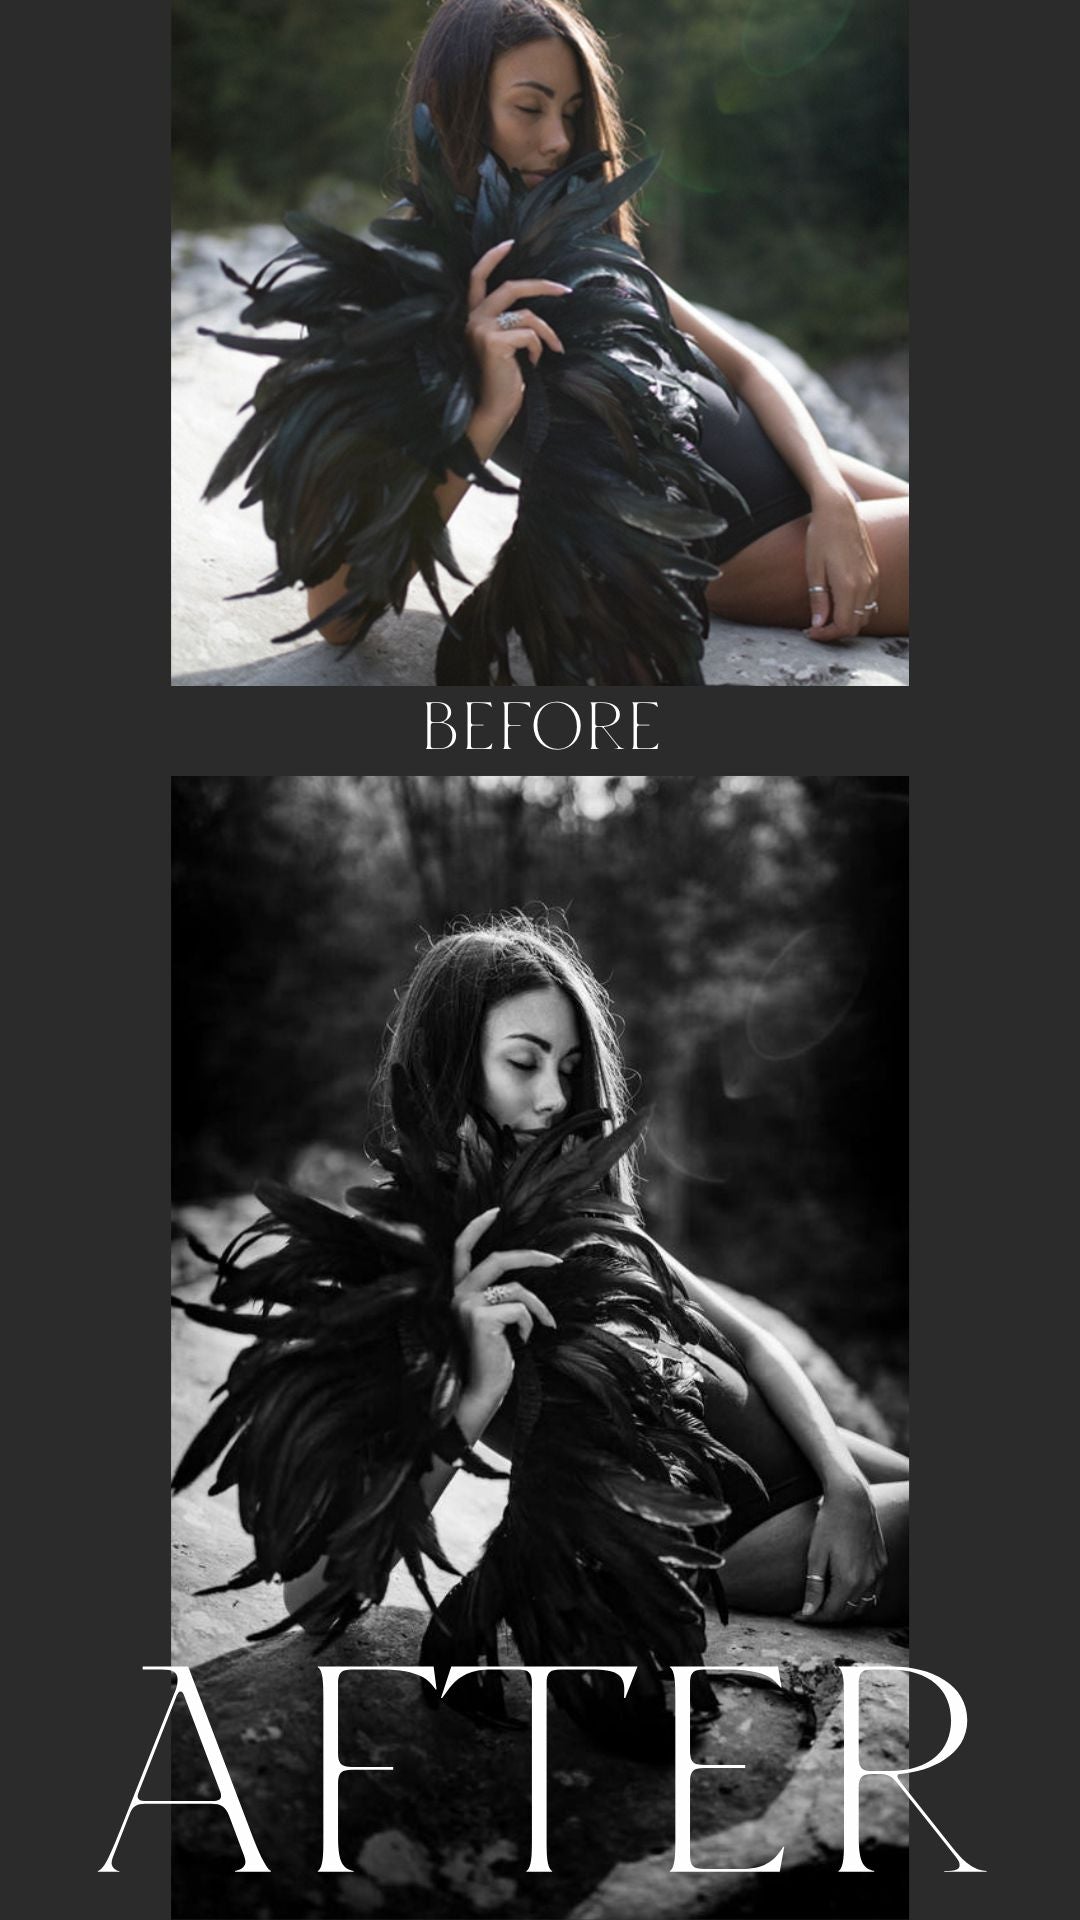 05. Black & White Collection  (28 presets)